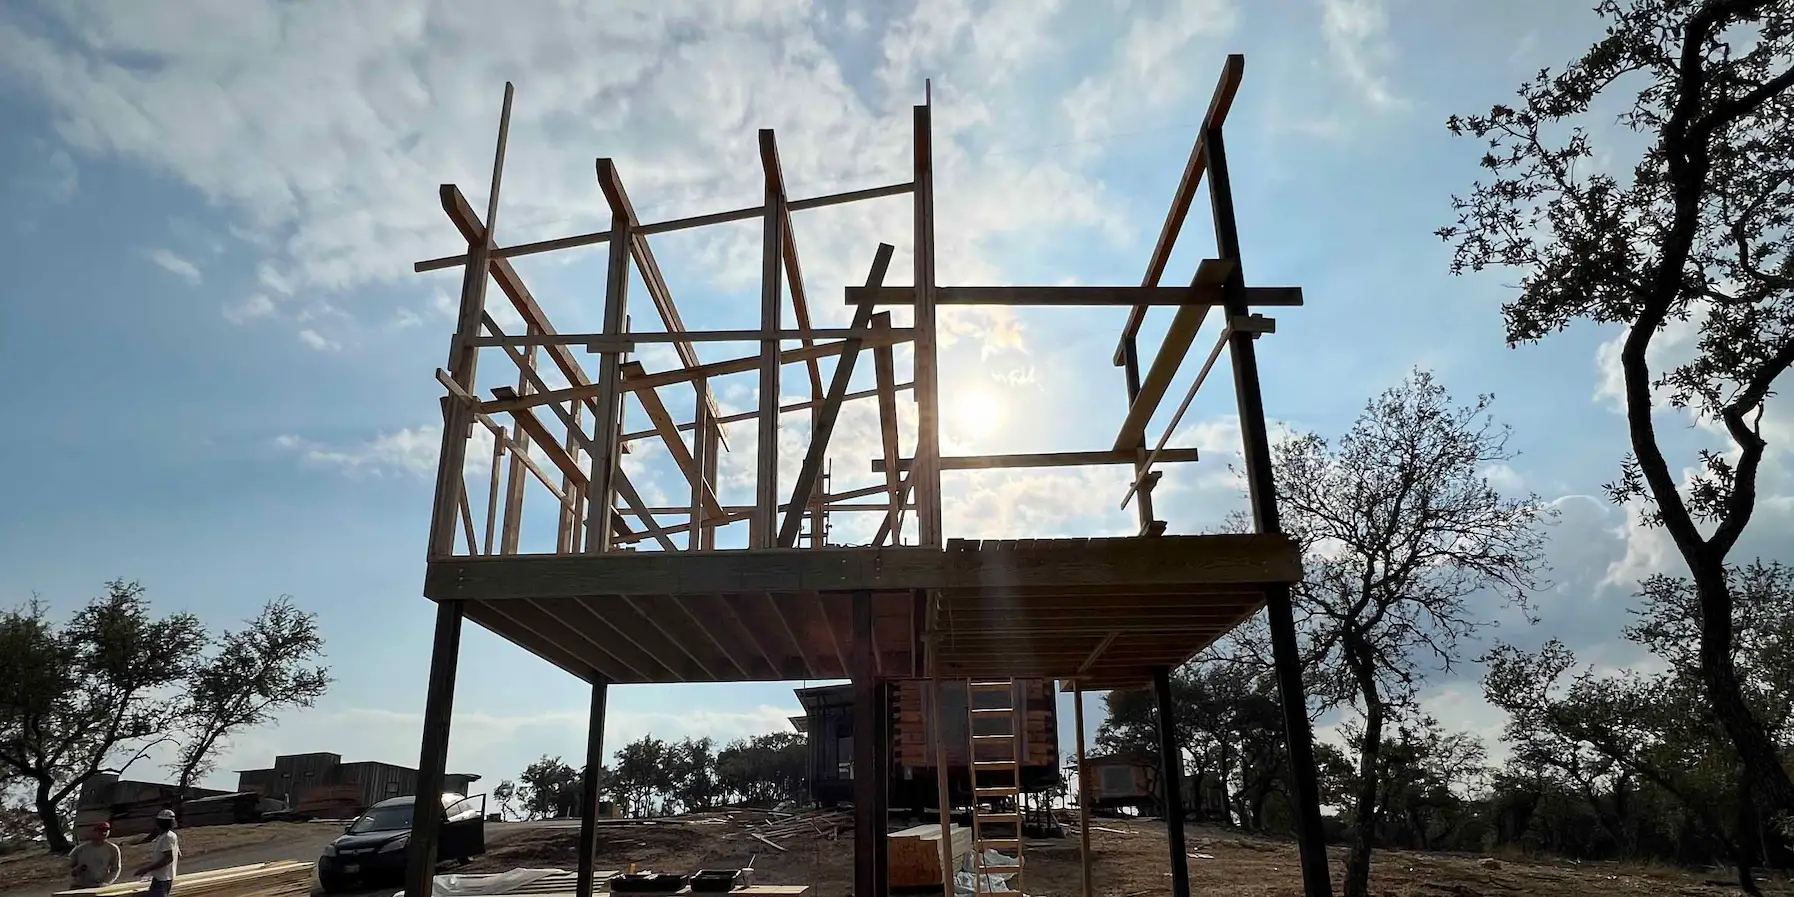 Construction of a new Treetop cabin in the scenic hills of Camp Fimfo Texas Hill Country